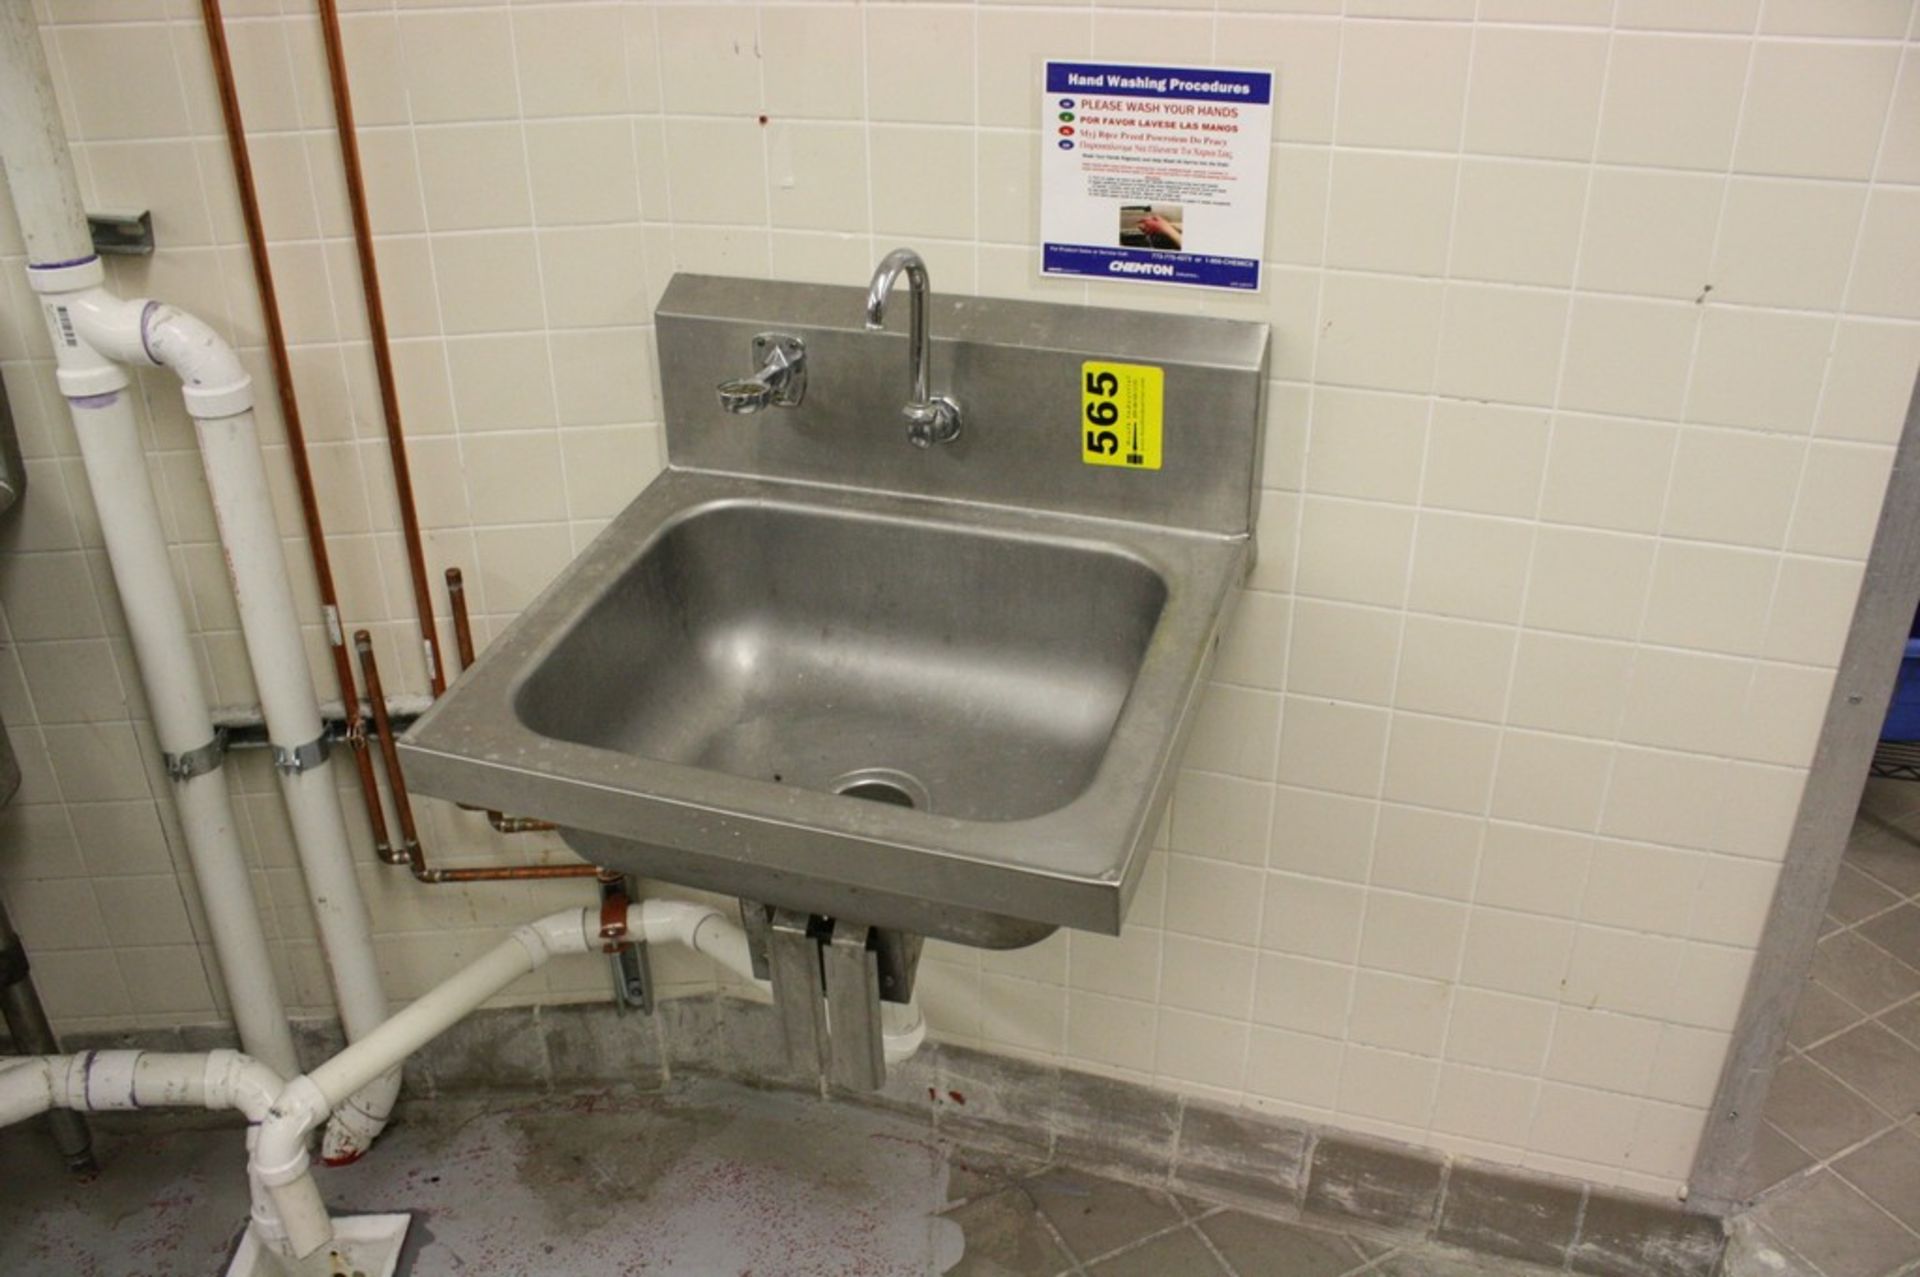 WALL MOUNTED STAINLESS STEEL SINK WITH KNEE PEDALS-25" X 22"